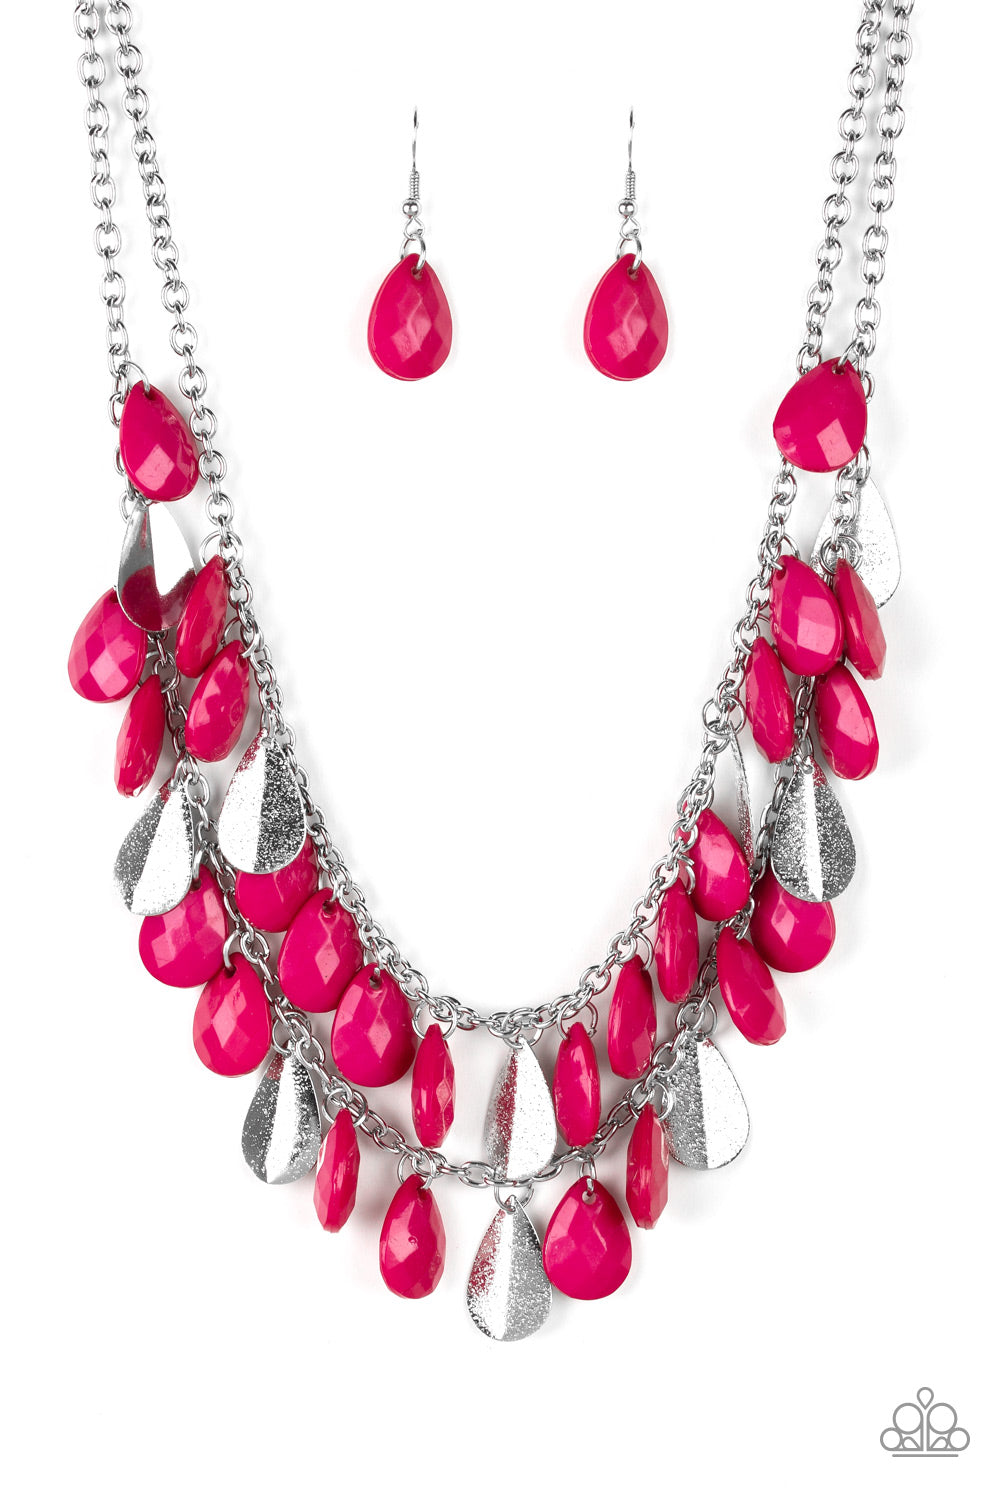 Life Of The FIESTA Necklace (Black, Multi, Pink)